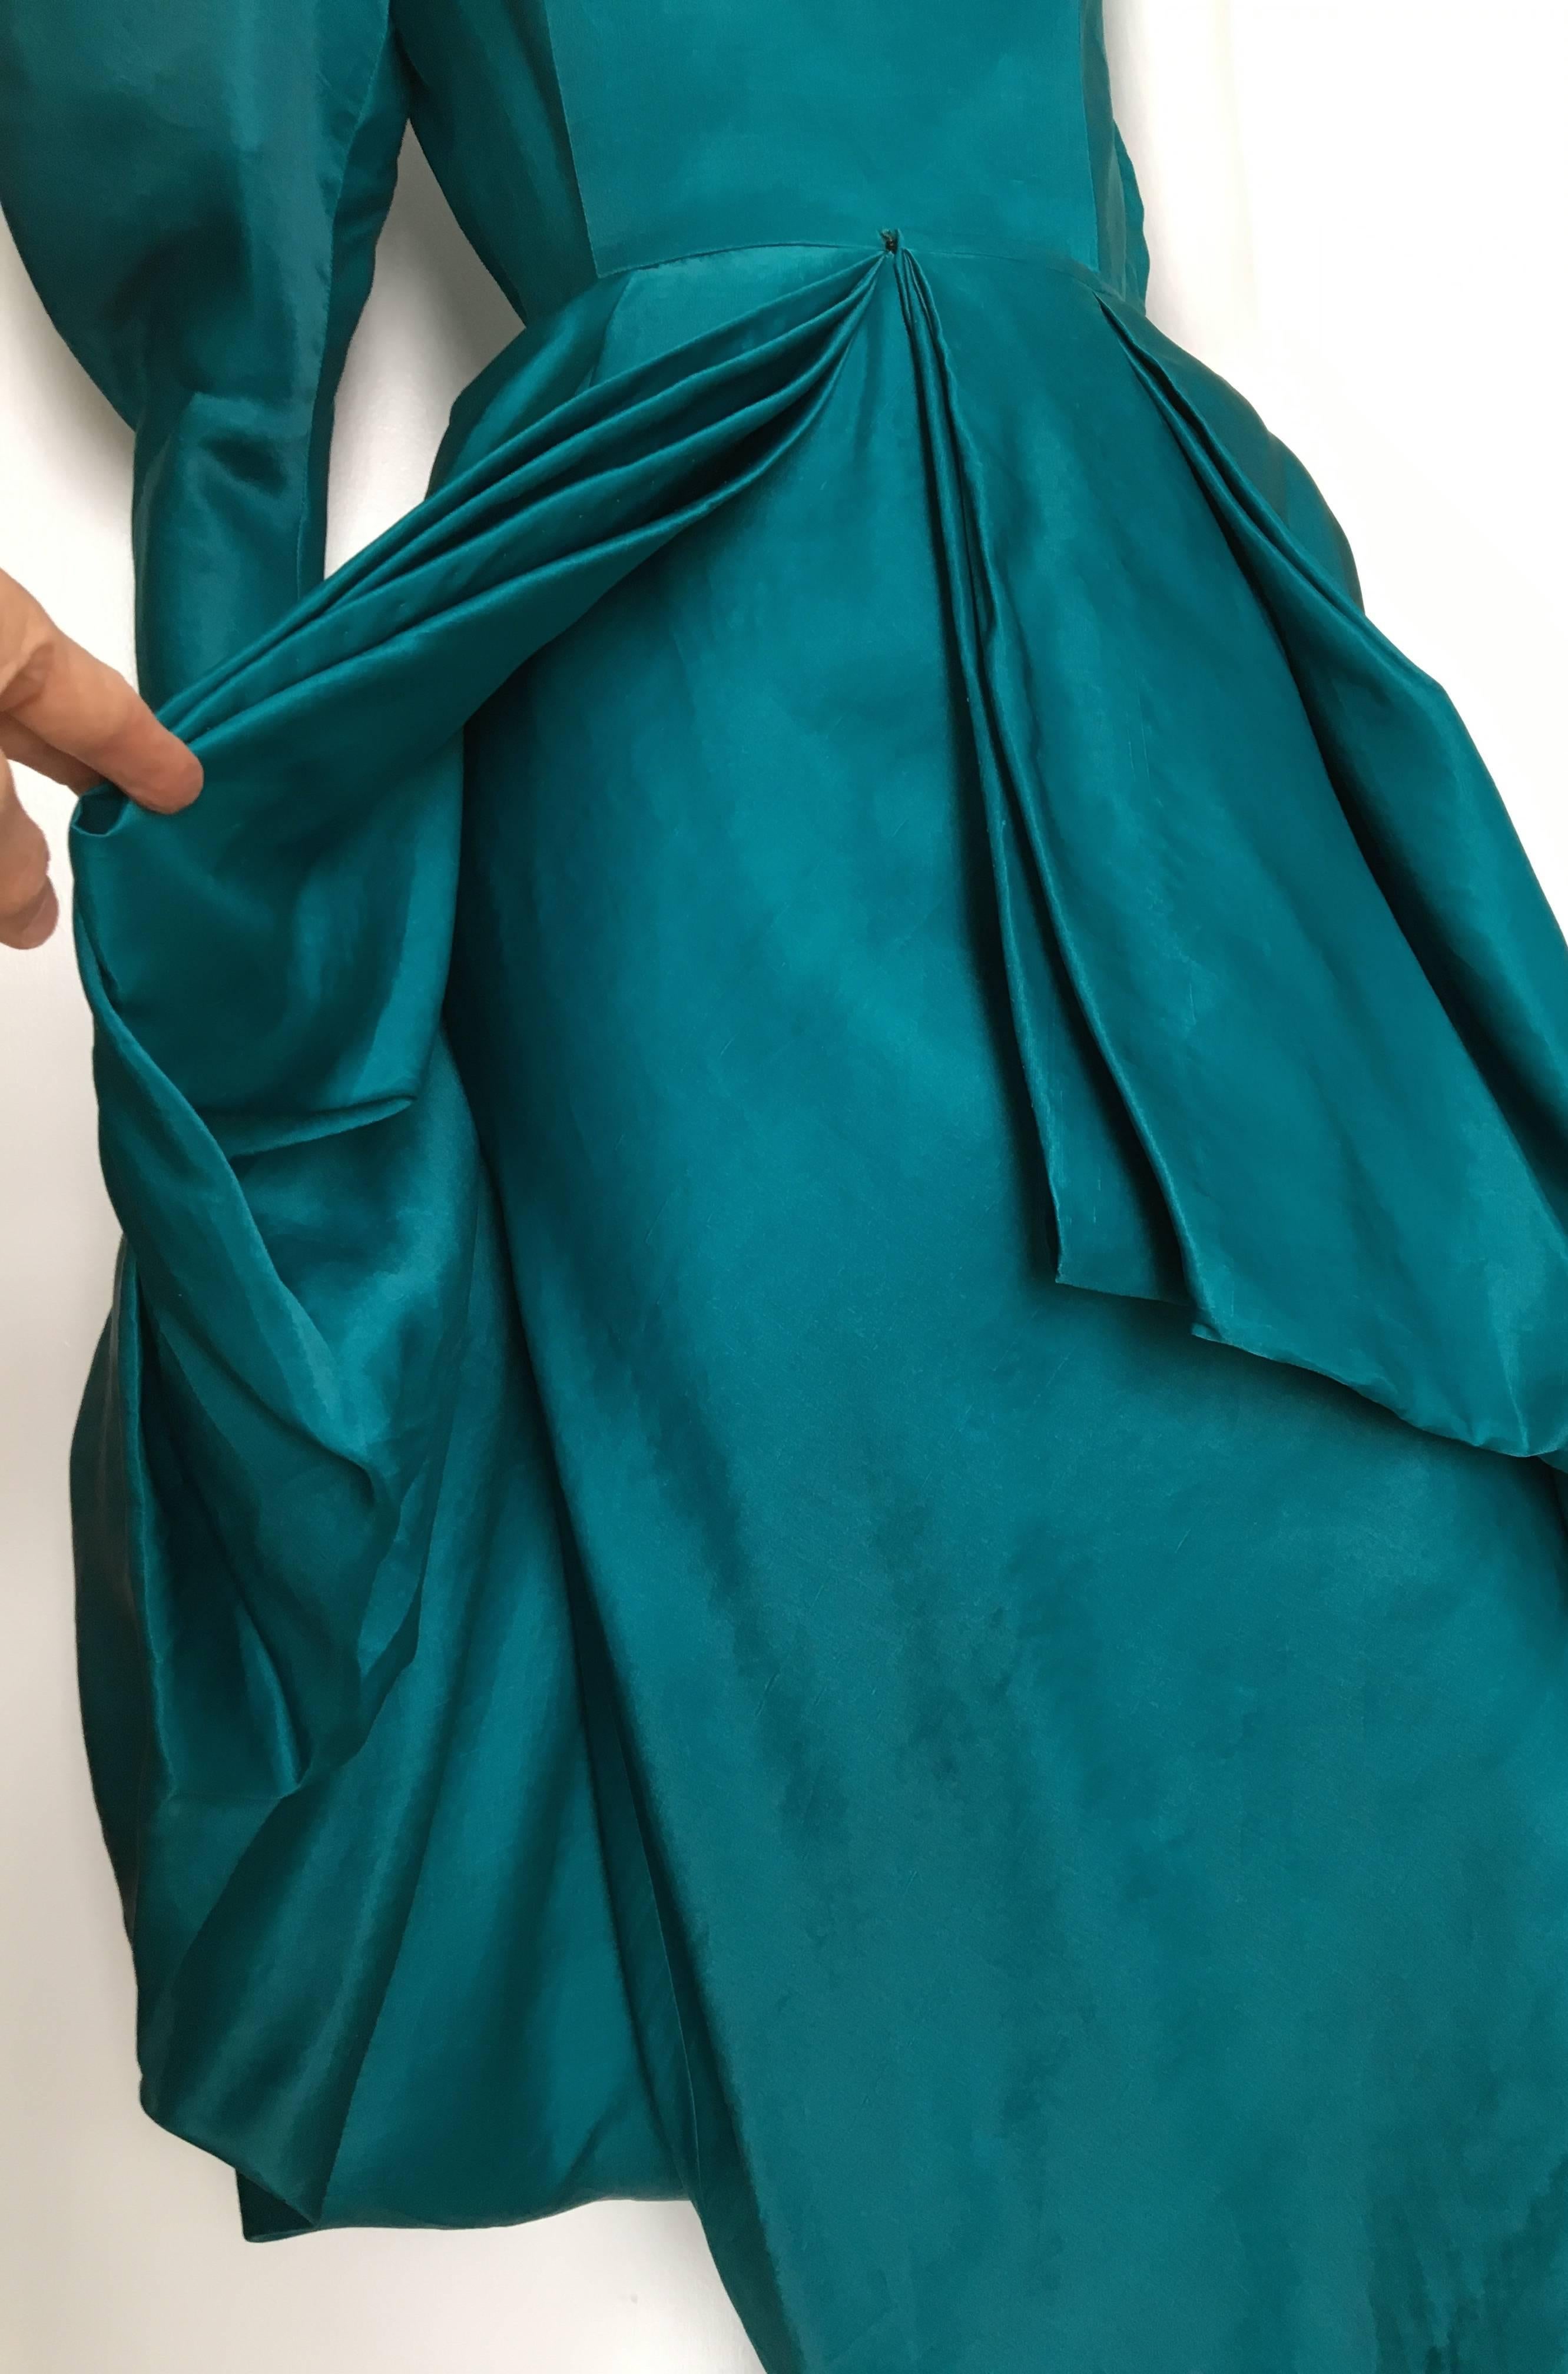 Blue Tan Giudicelli 80s Silk Evening Gown Size 4. For Sale